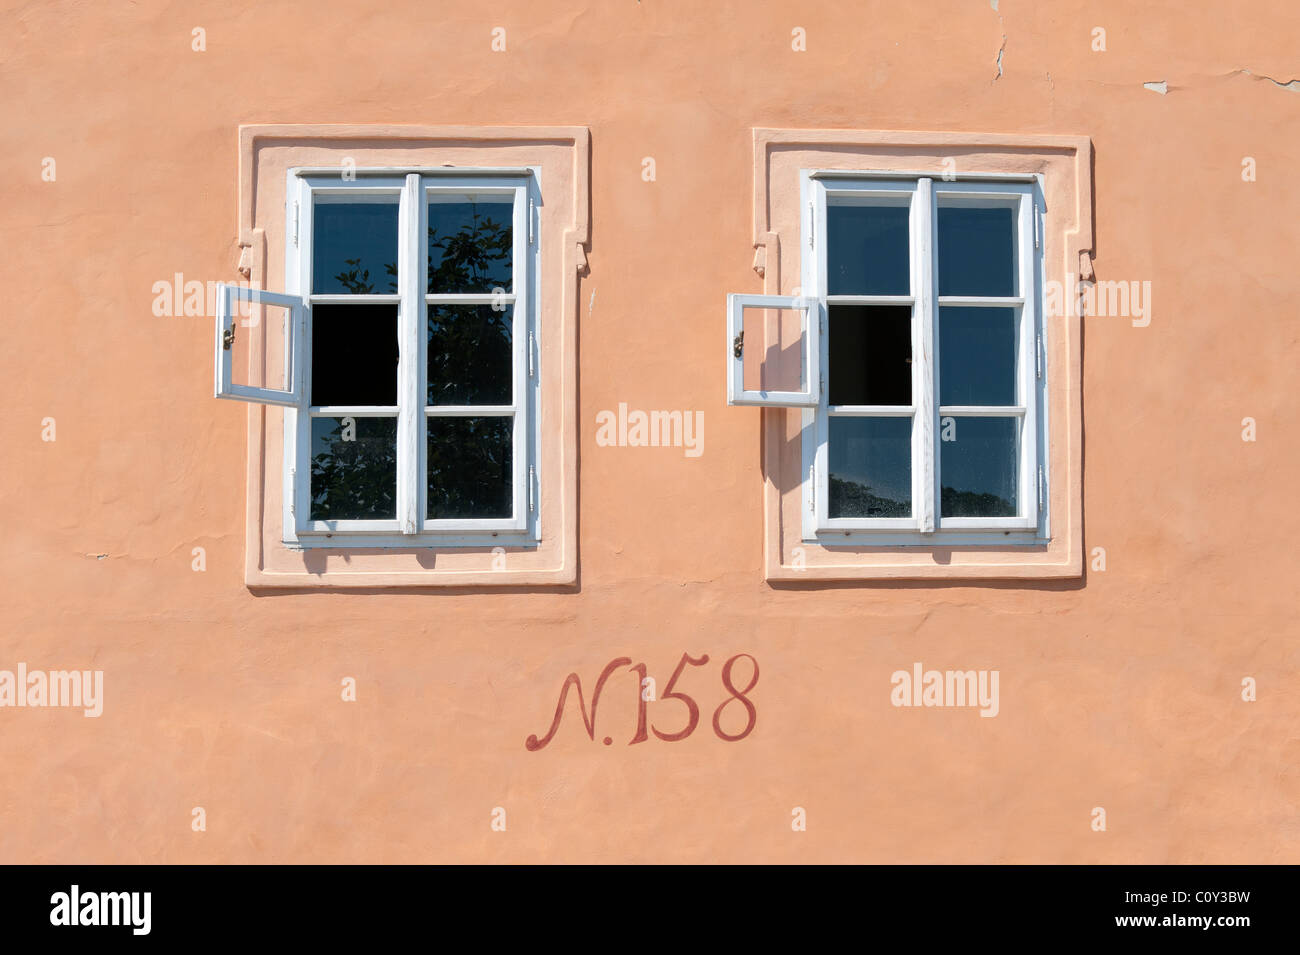 Prague - Two old windows with a number 158 Stock Photo